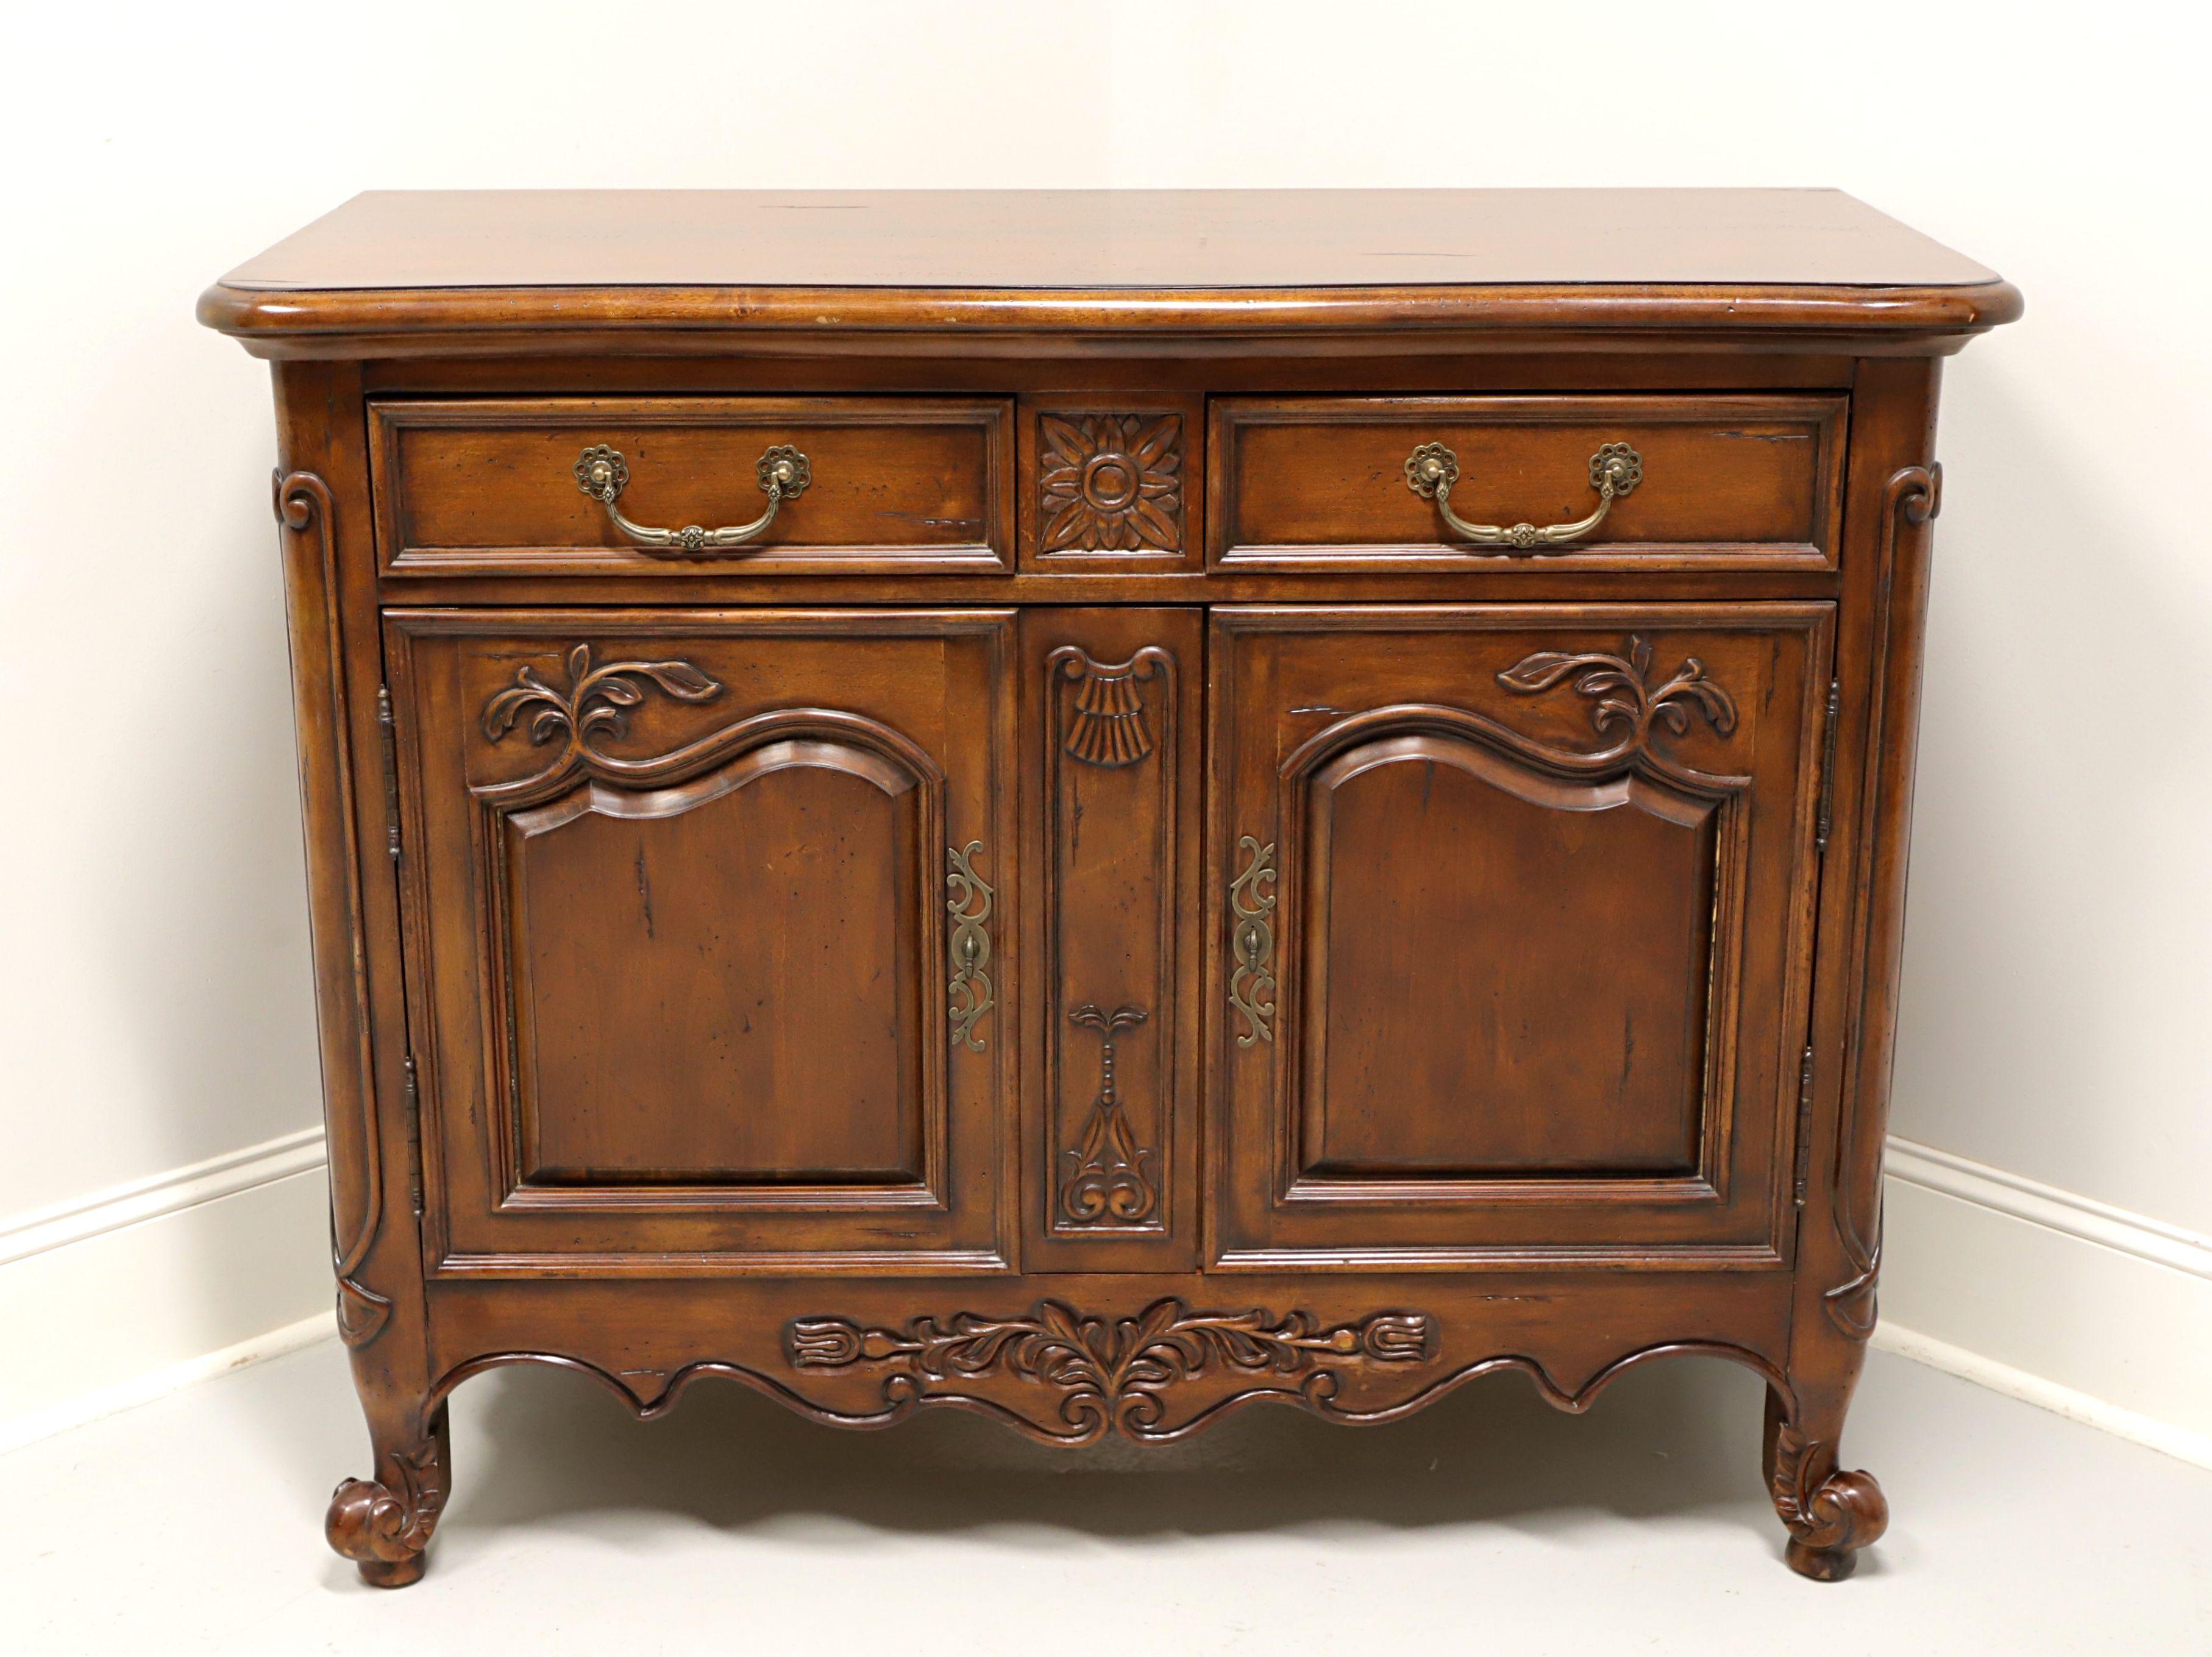 A French Country style server, unbranded, similar quality to Drexel Heritage or Thomasville. Solid cherry with brass hardware, decorative carvings, carved apron and scroll feet. Features two drawers of dovetail construction over a lower two door